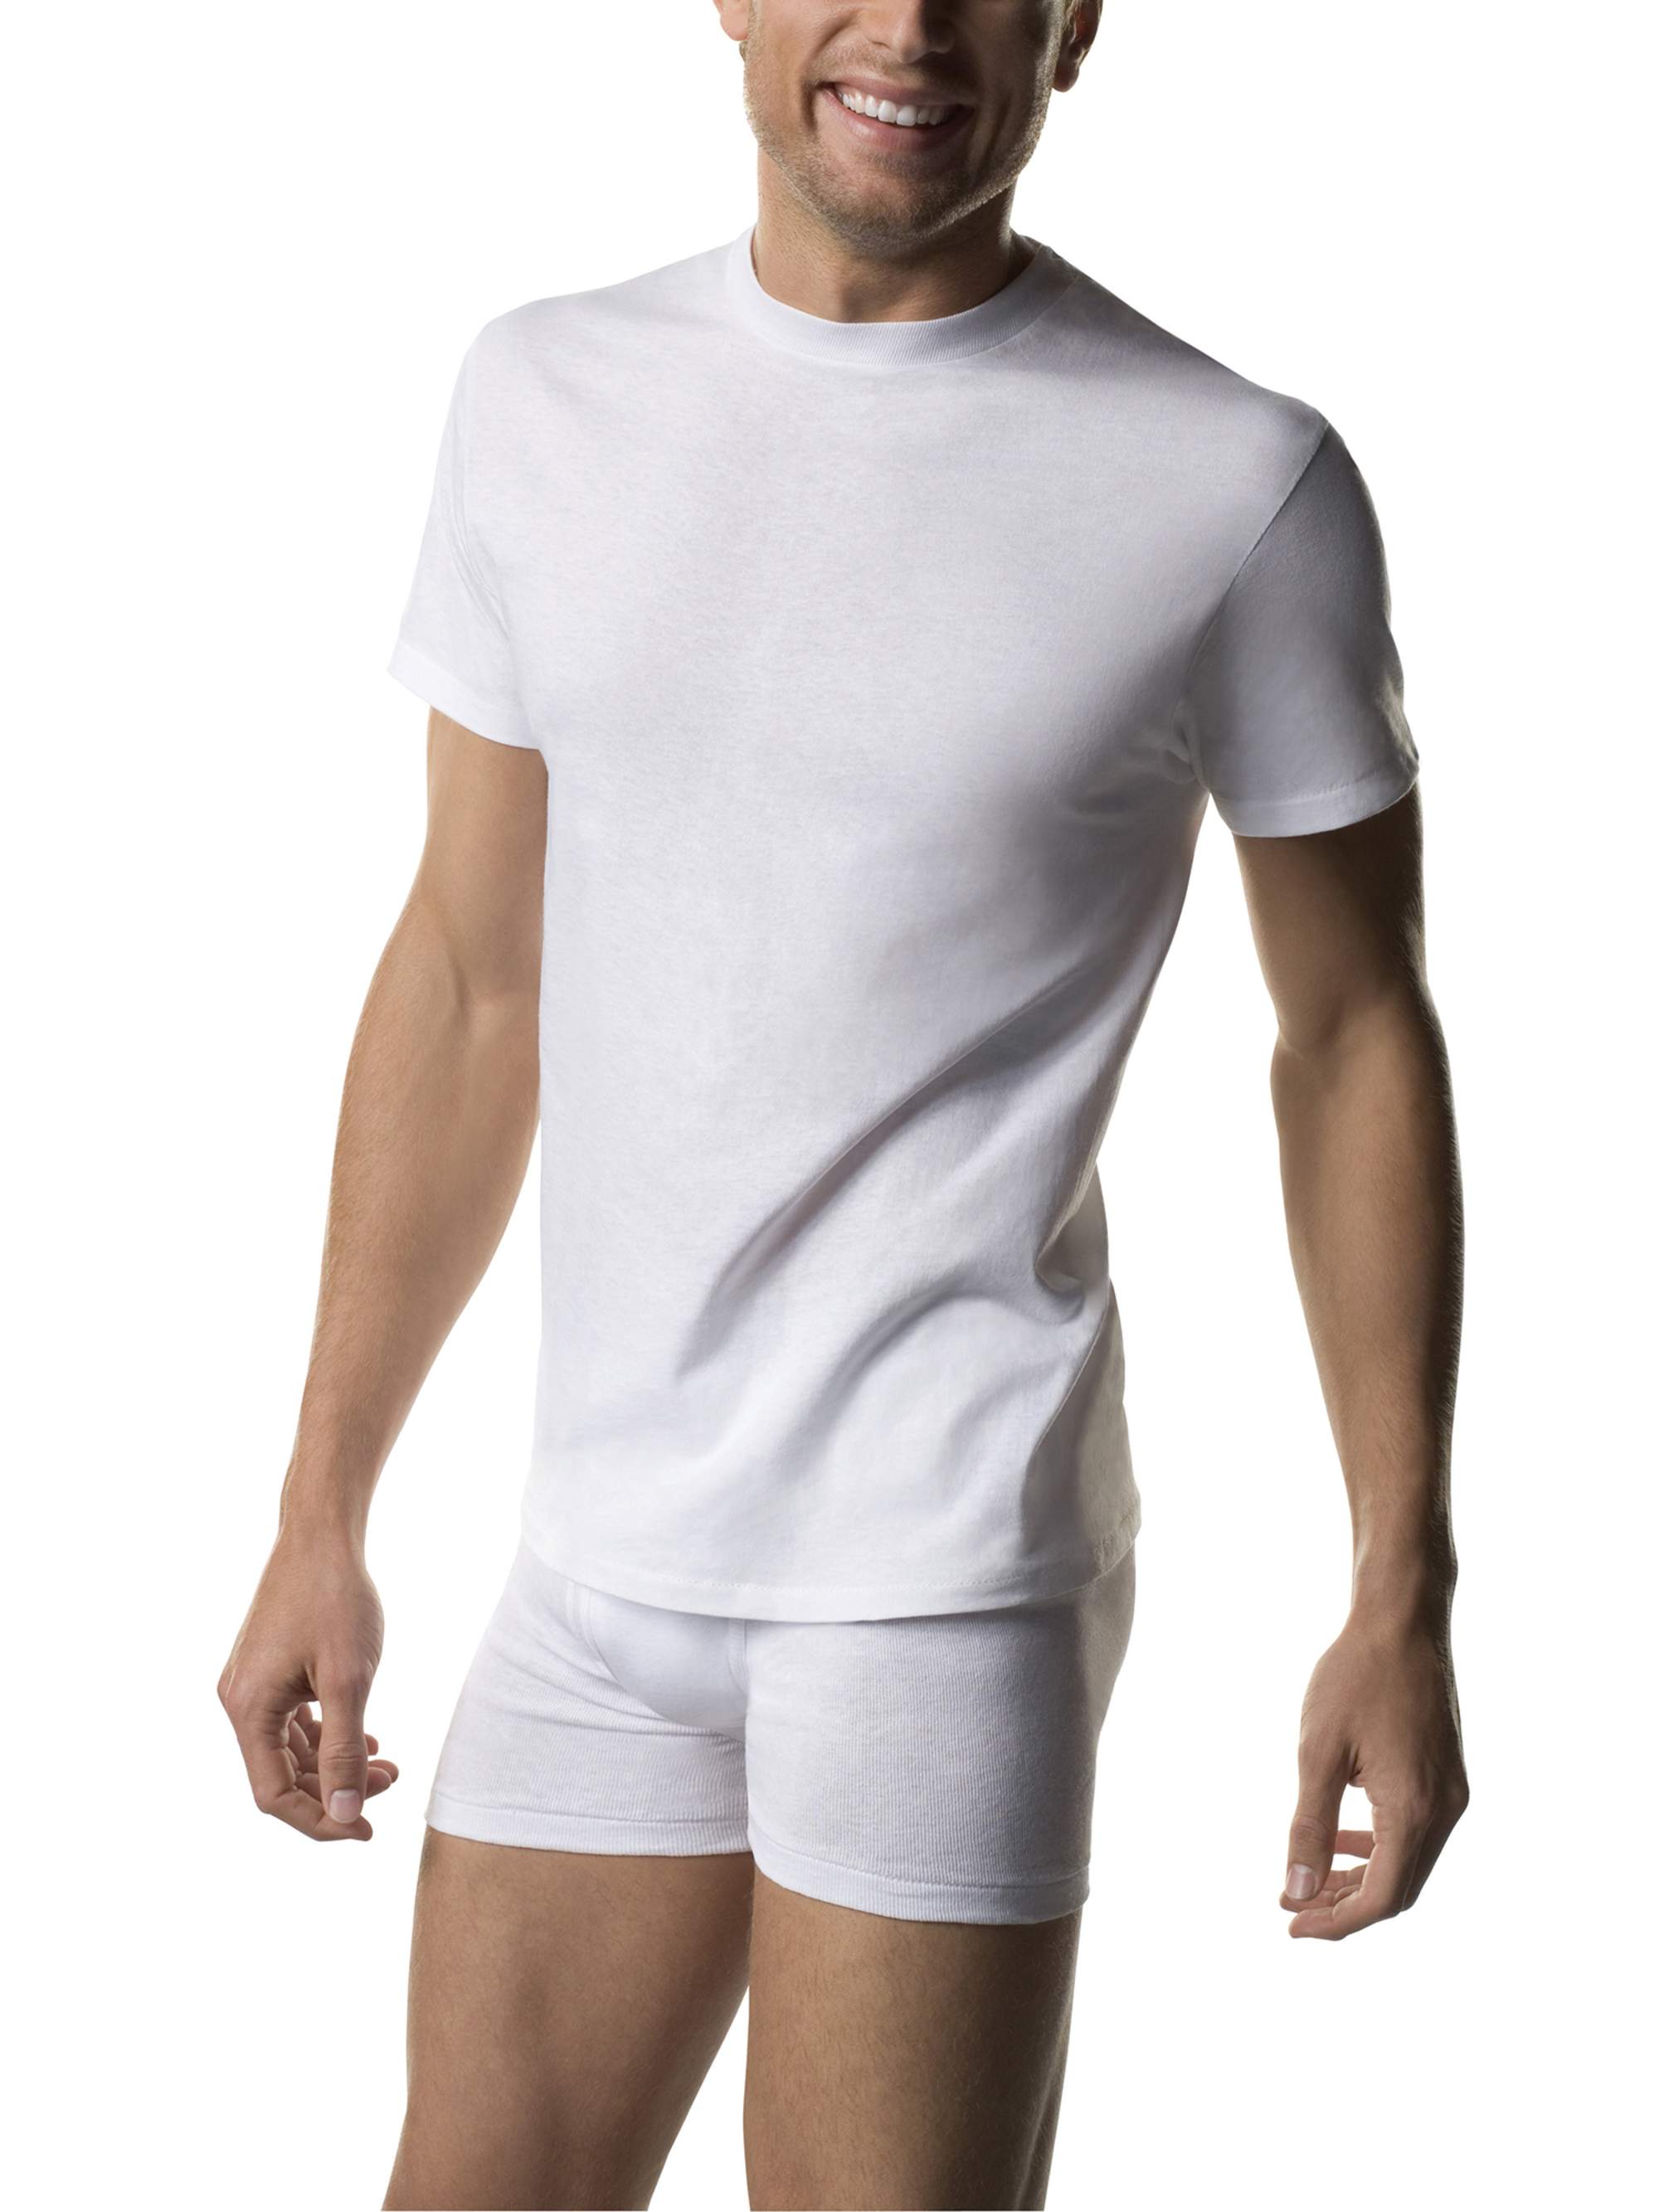 Mens ComfortSoft White Crew Neck T-Shirt Value 8-Pack - image 1 of 2